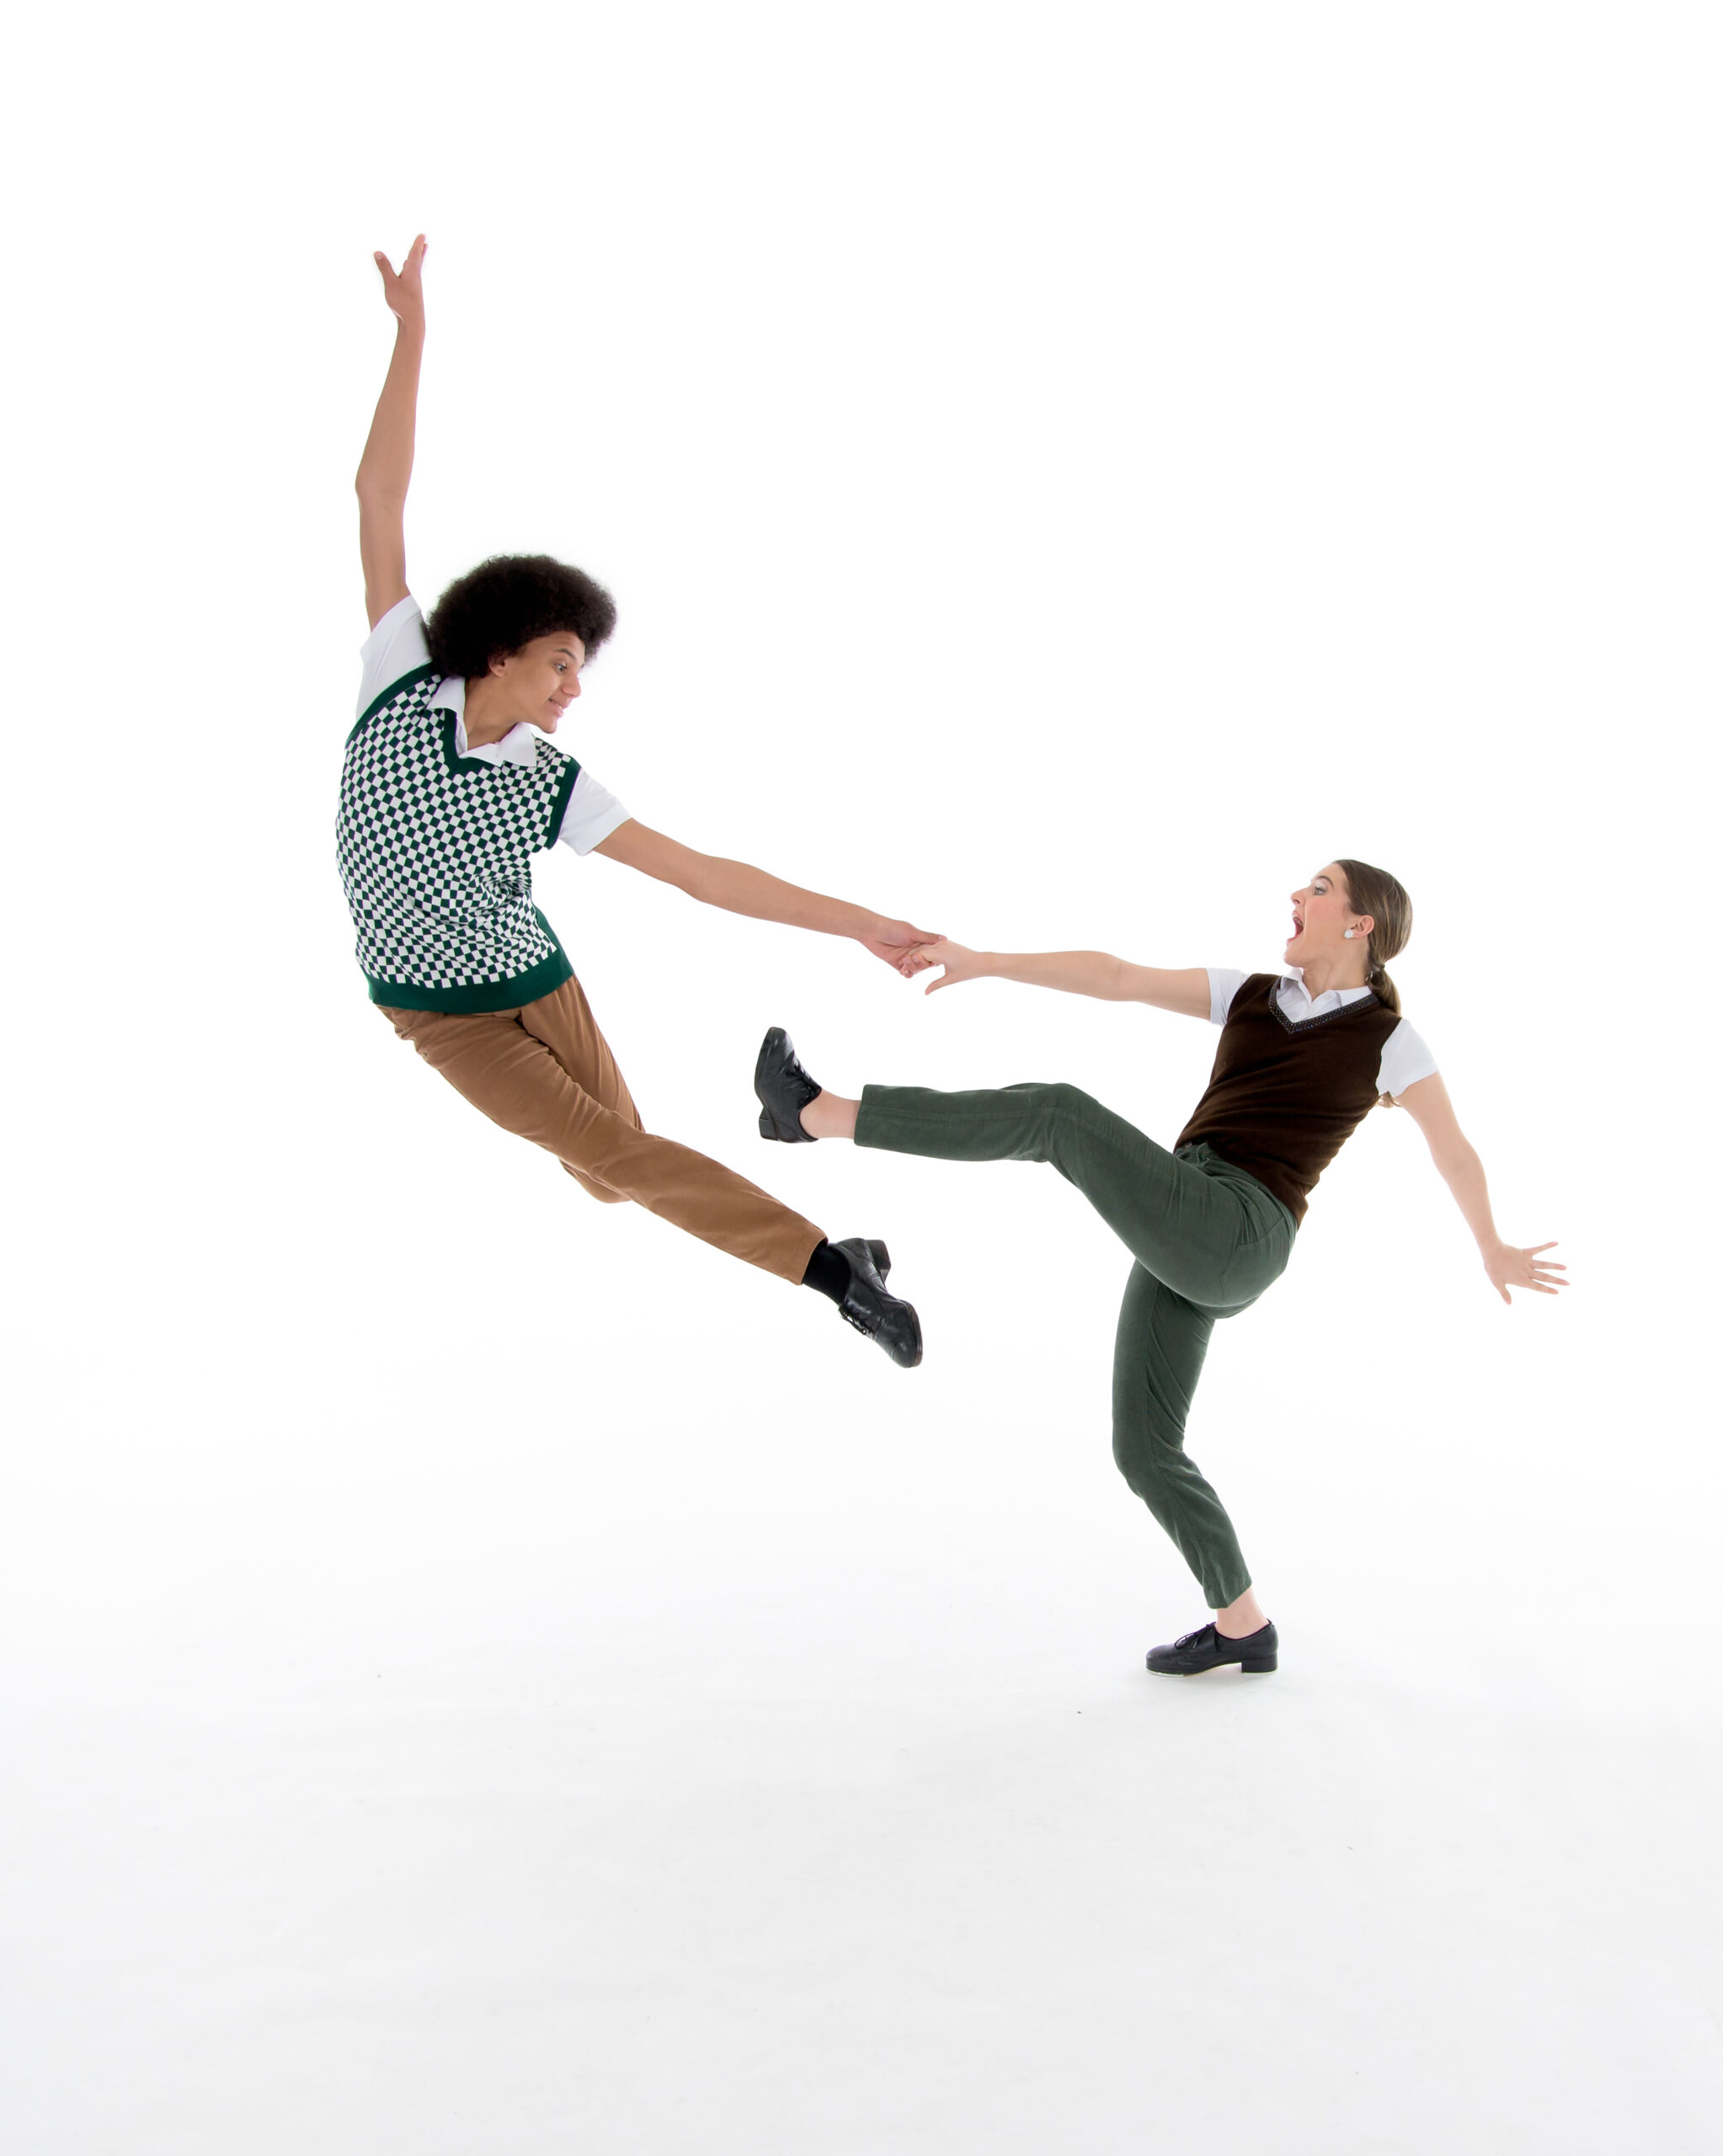 Female and male tap duet - male dancer is jumping while female dancer is holding his hand and leaning back in an attitude to show off her shoe.